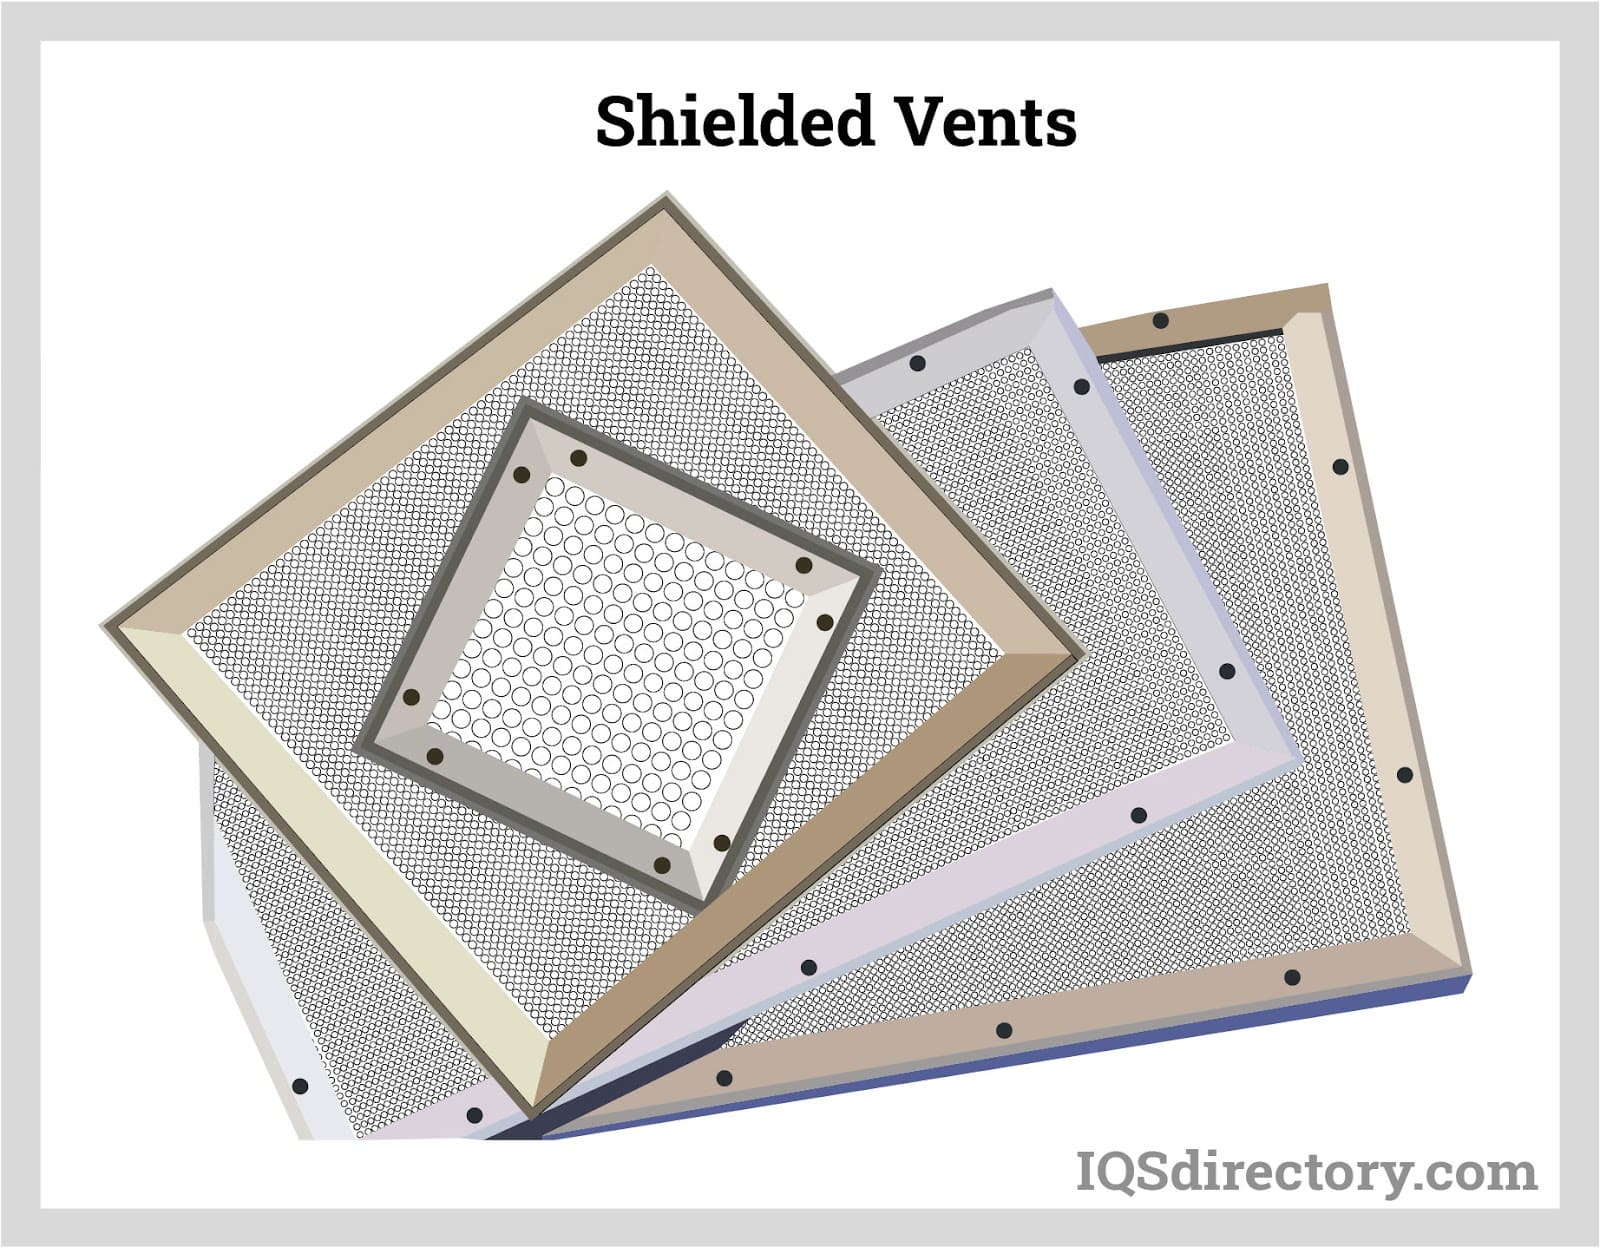 Shielded Vents